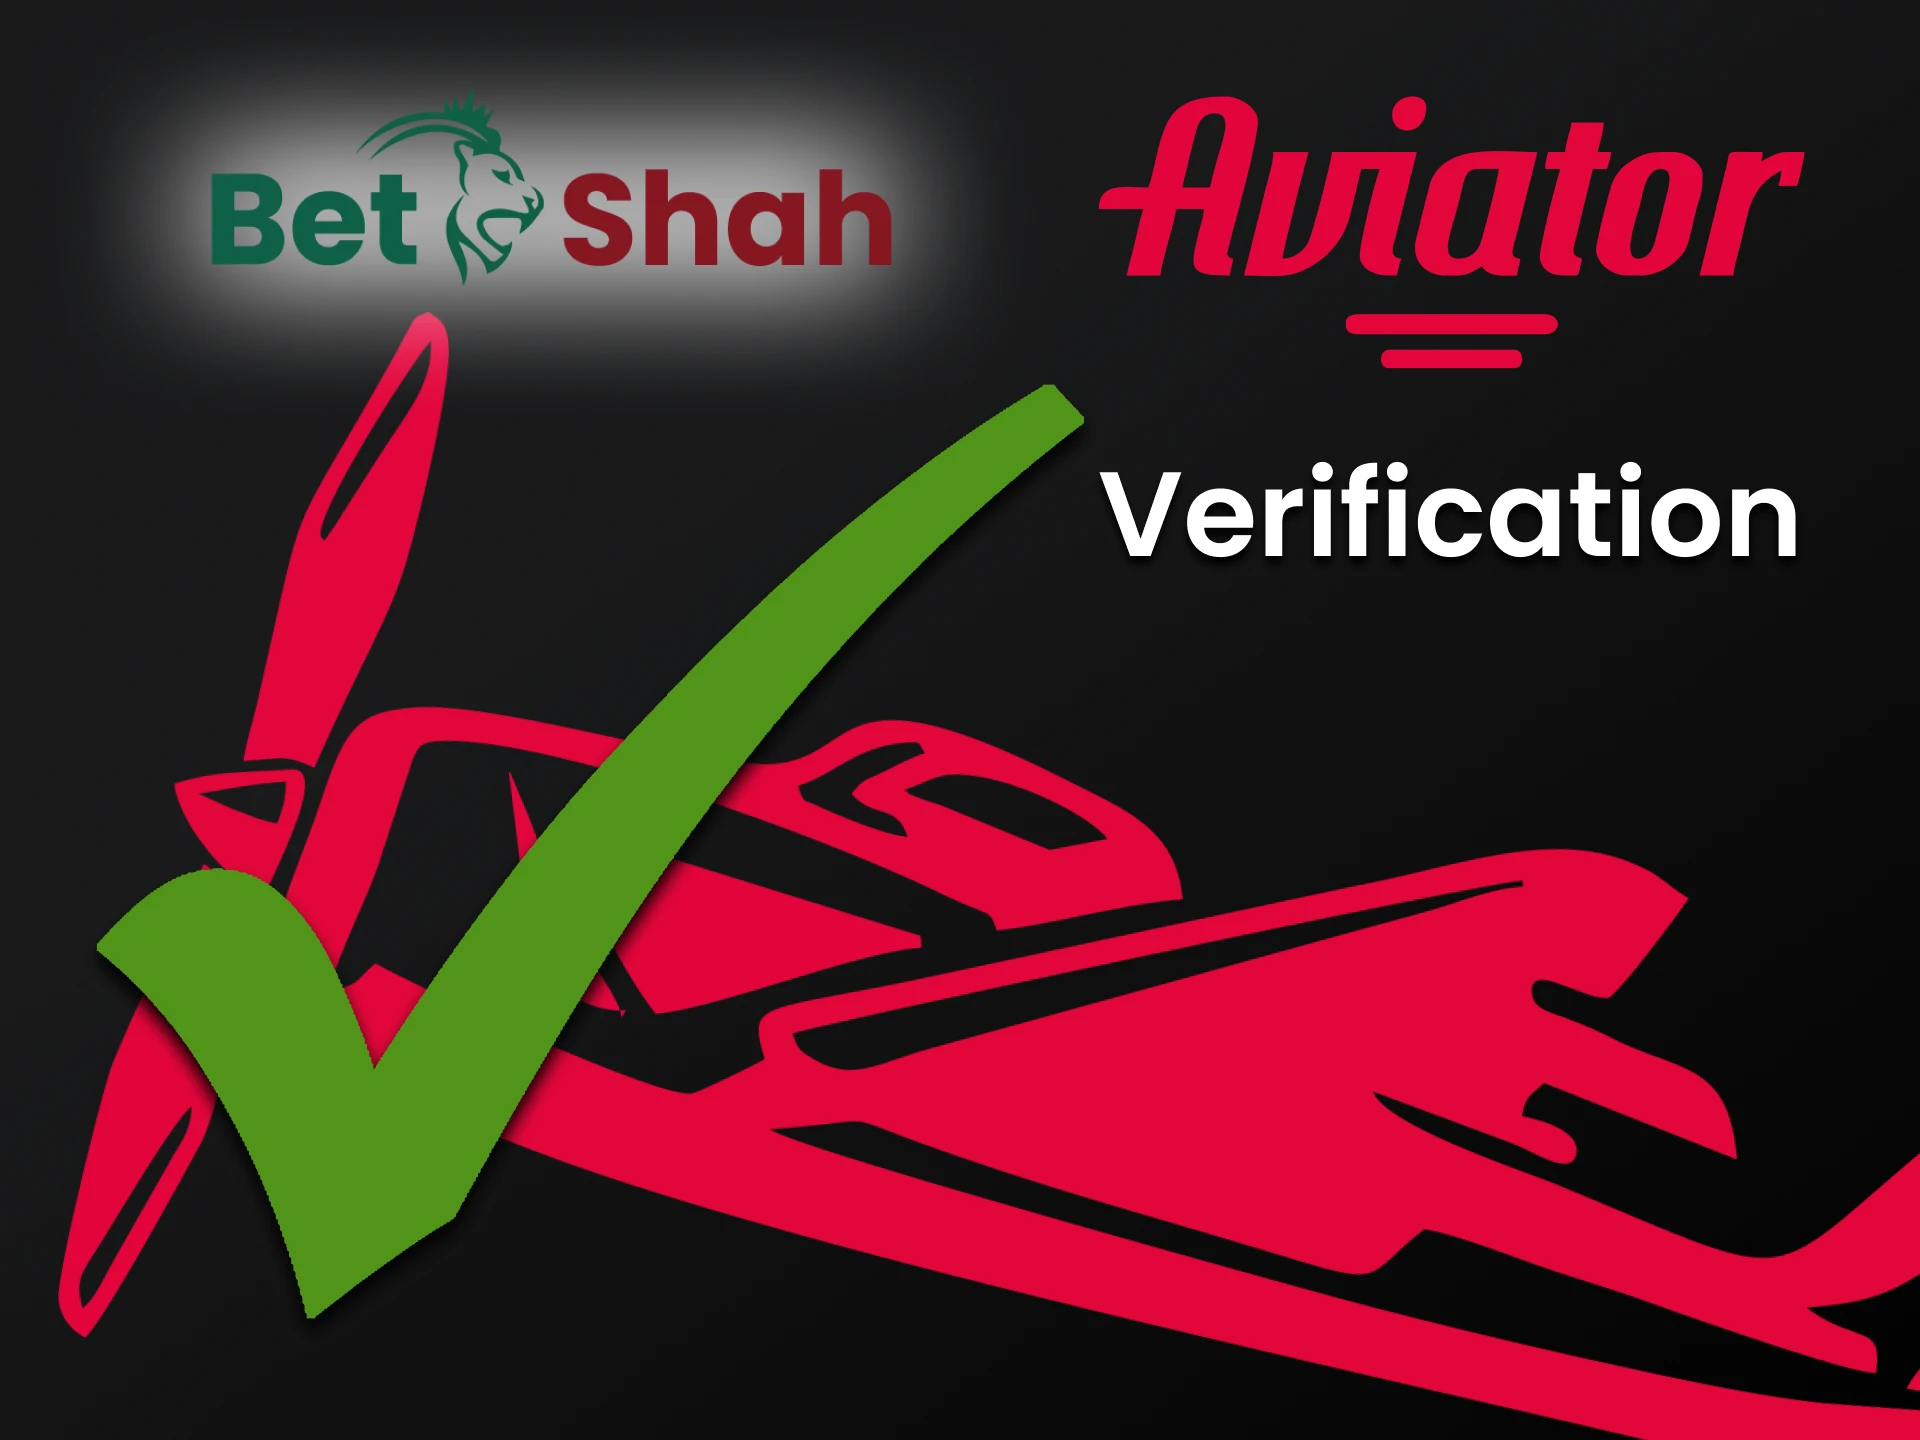 Fill in the required details to play Aviator at BetShah.